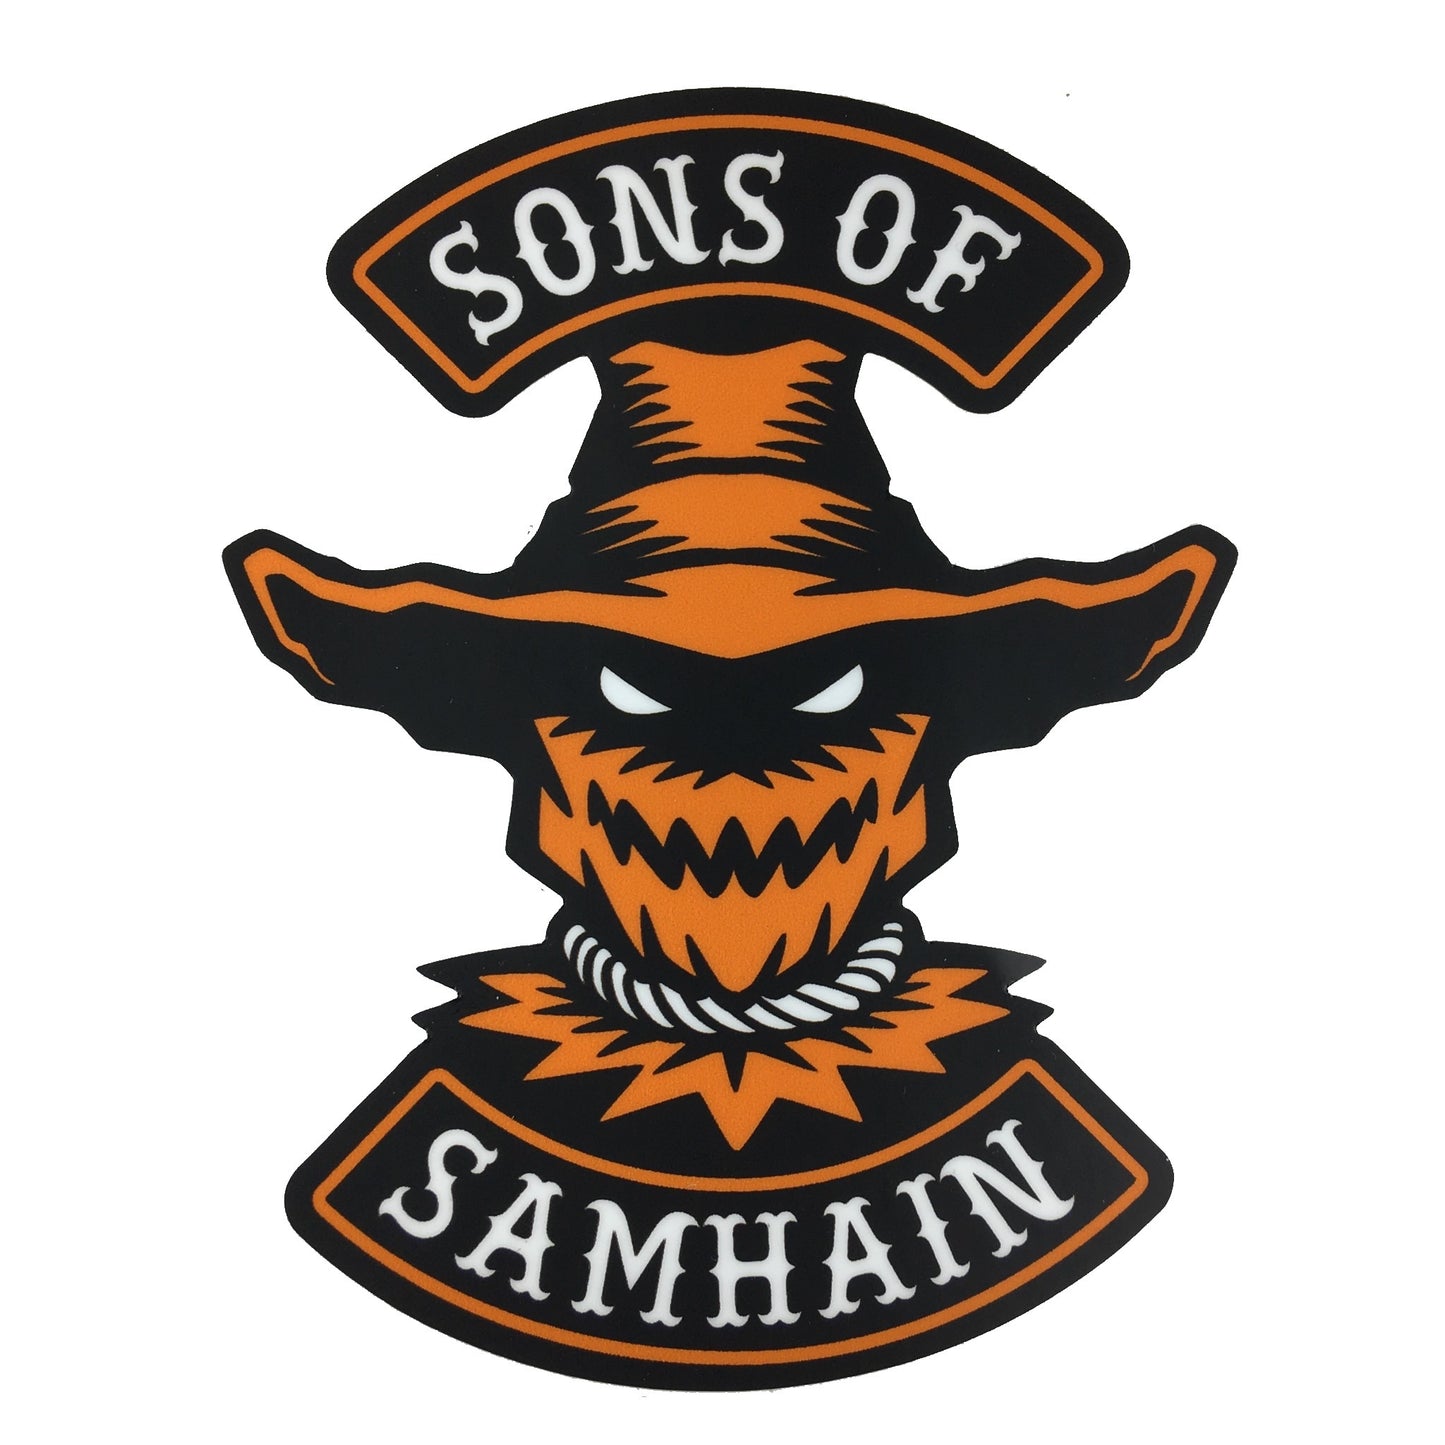 Sons Of Samhain scarecrow motorcycle club Halloween sticker by Monsterologist